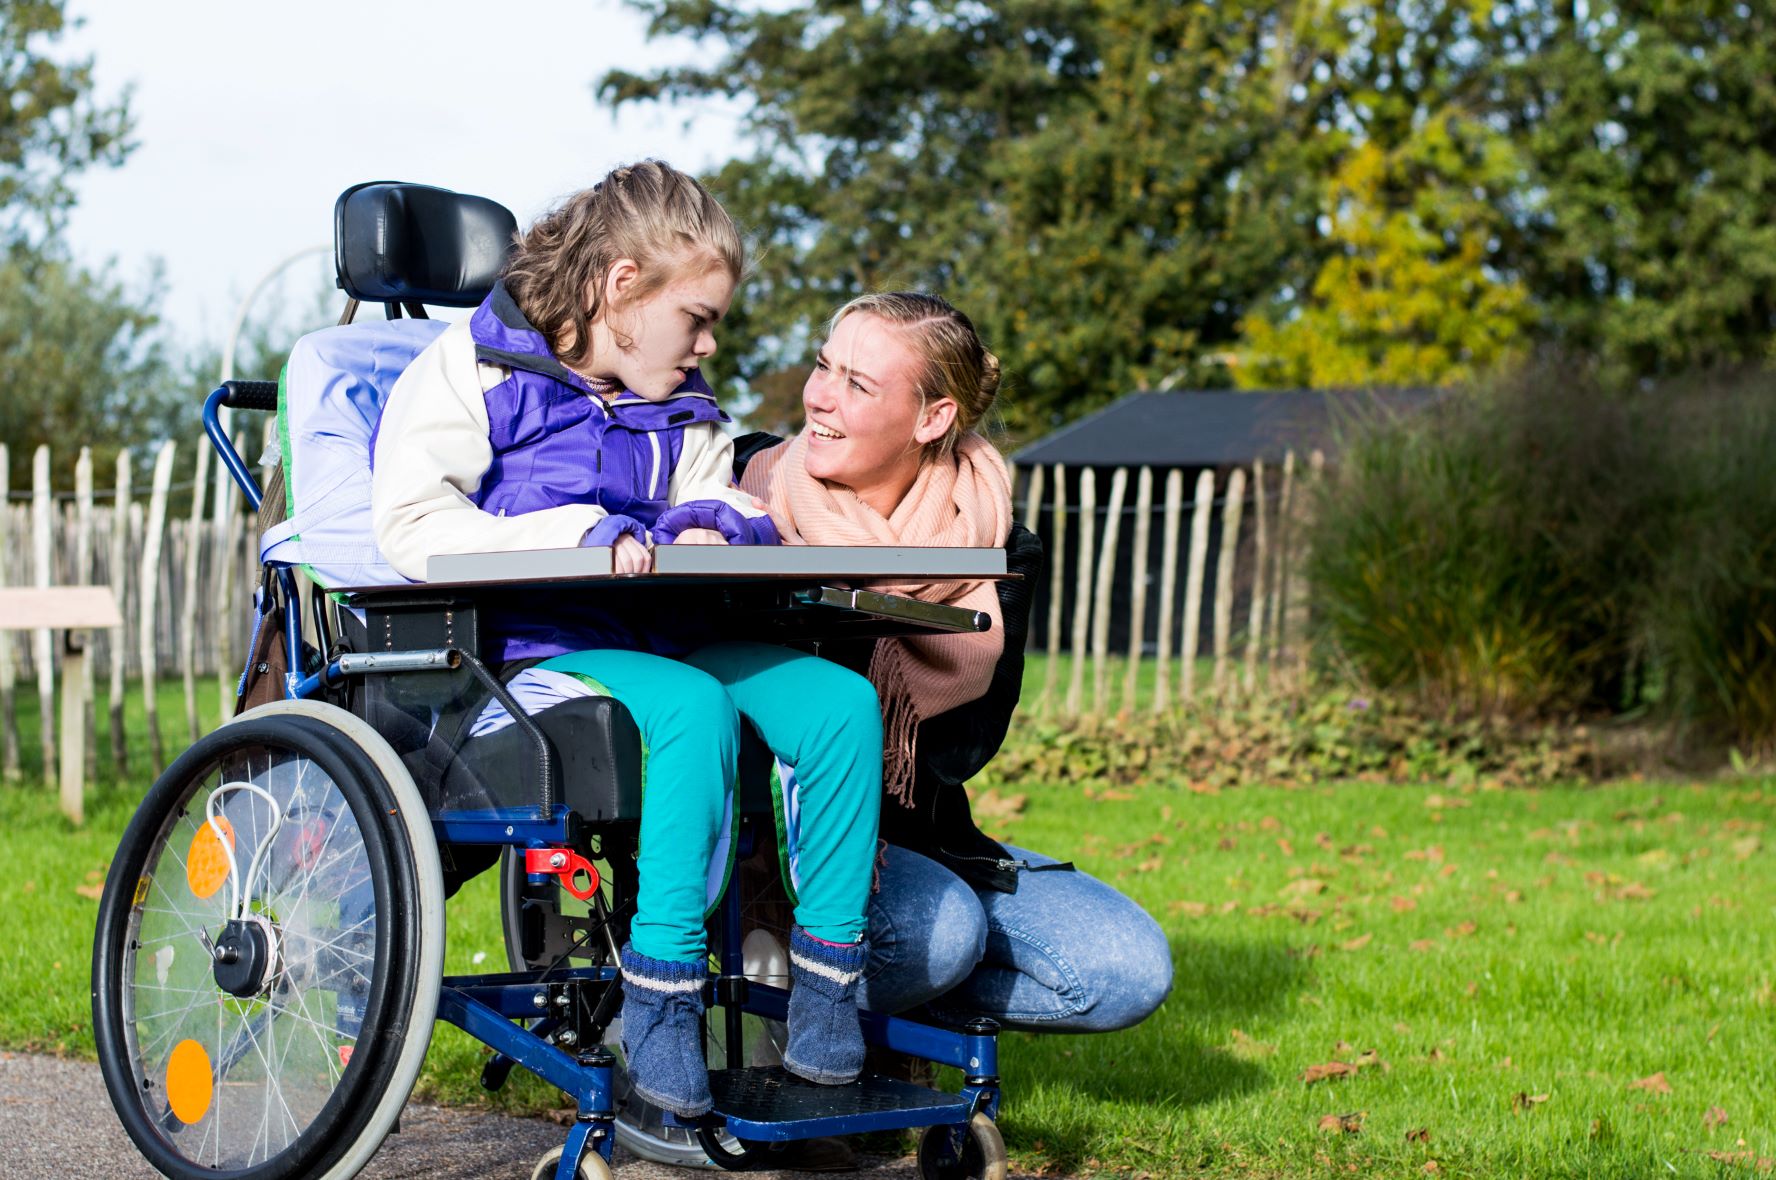 A woman kneels down next to a young girl in a wheelchair